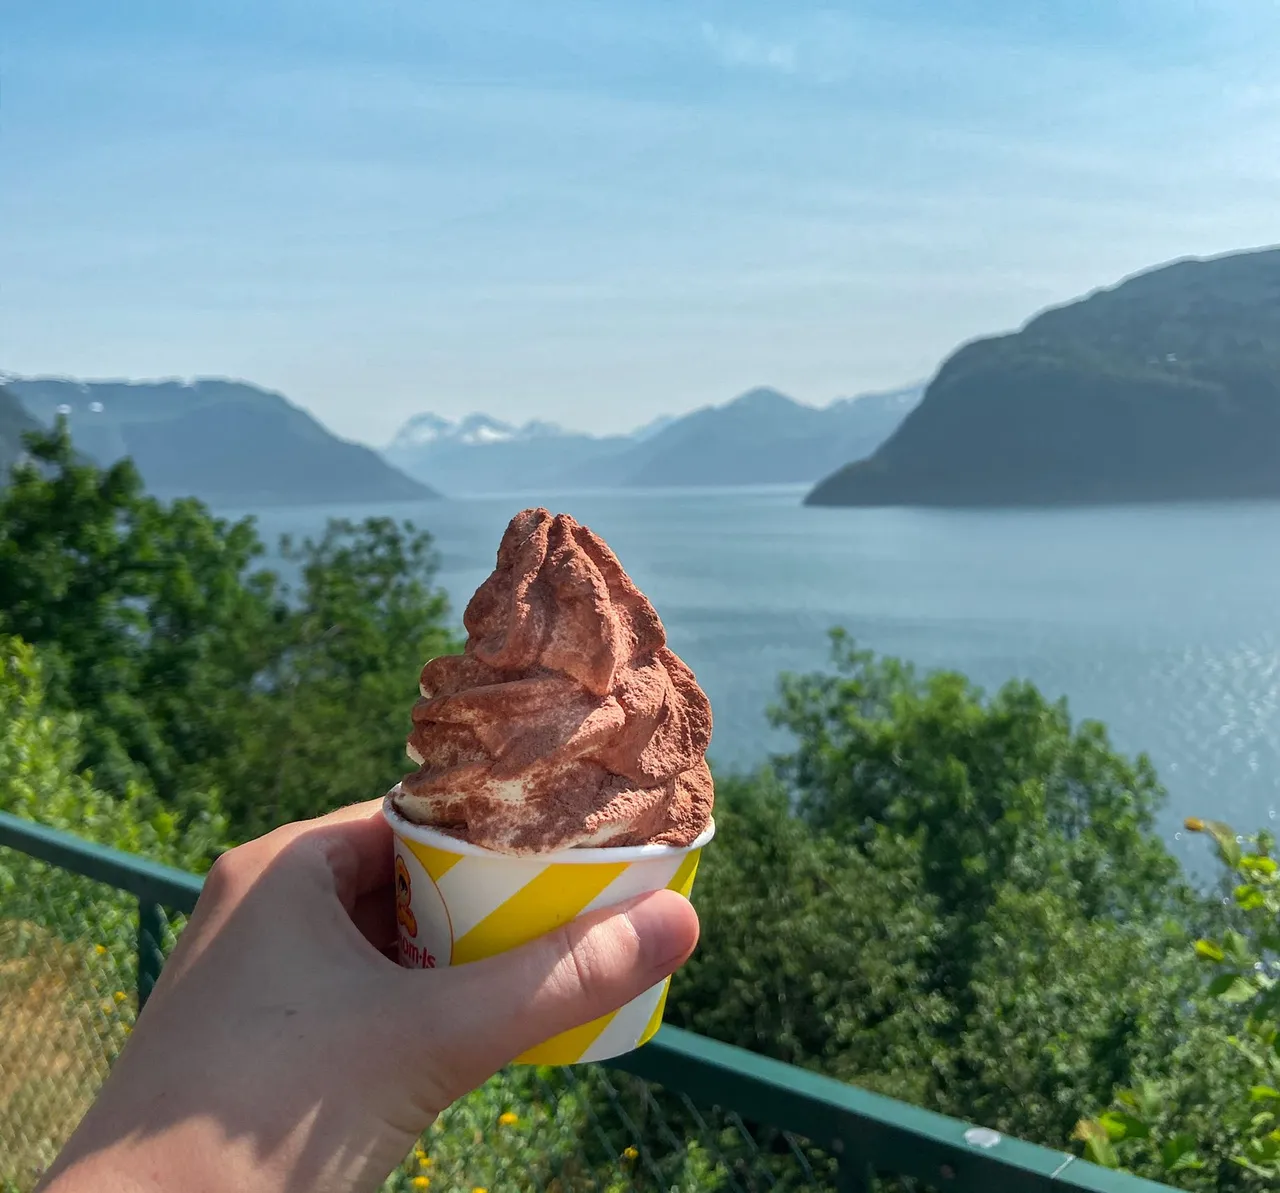 Ice cream is always a good idea after a long hike